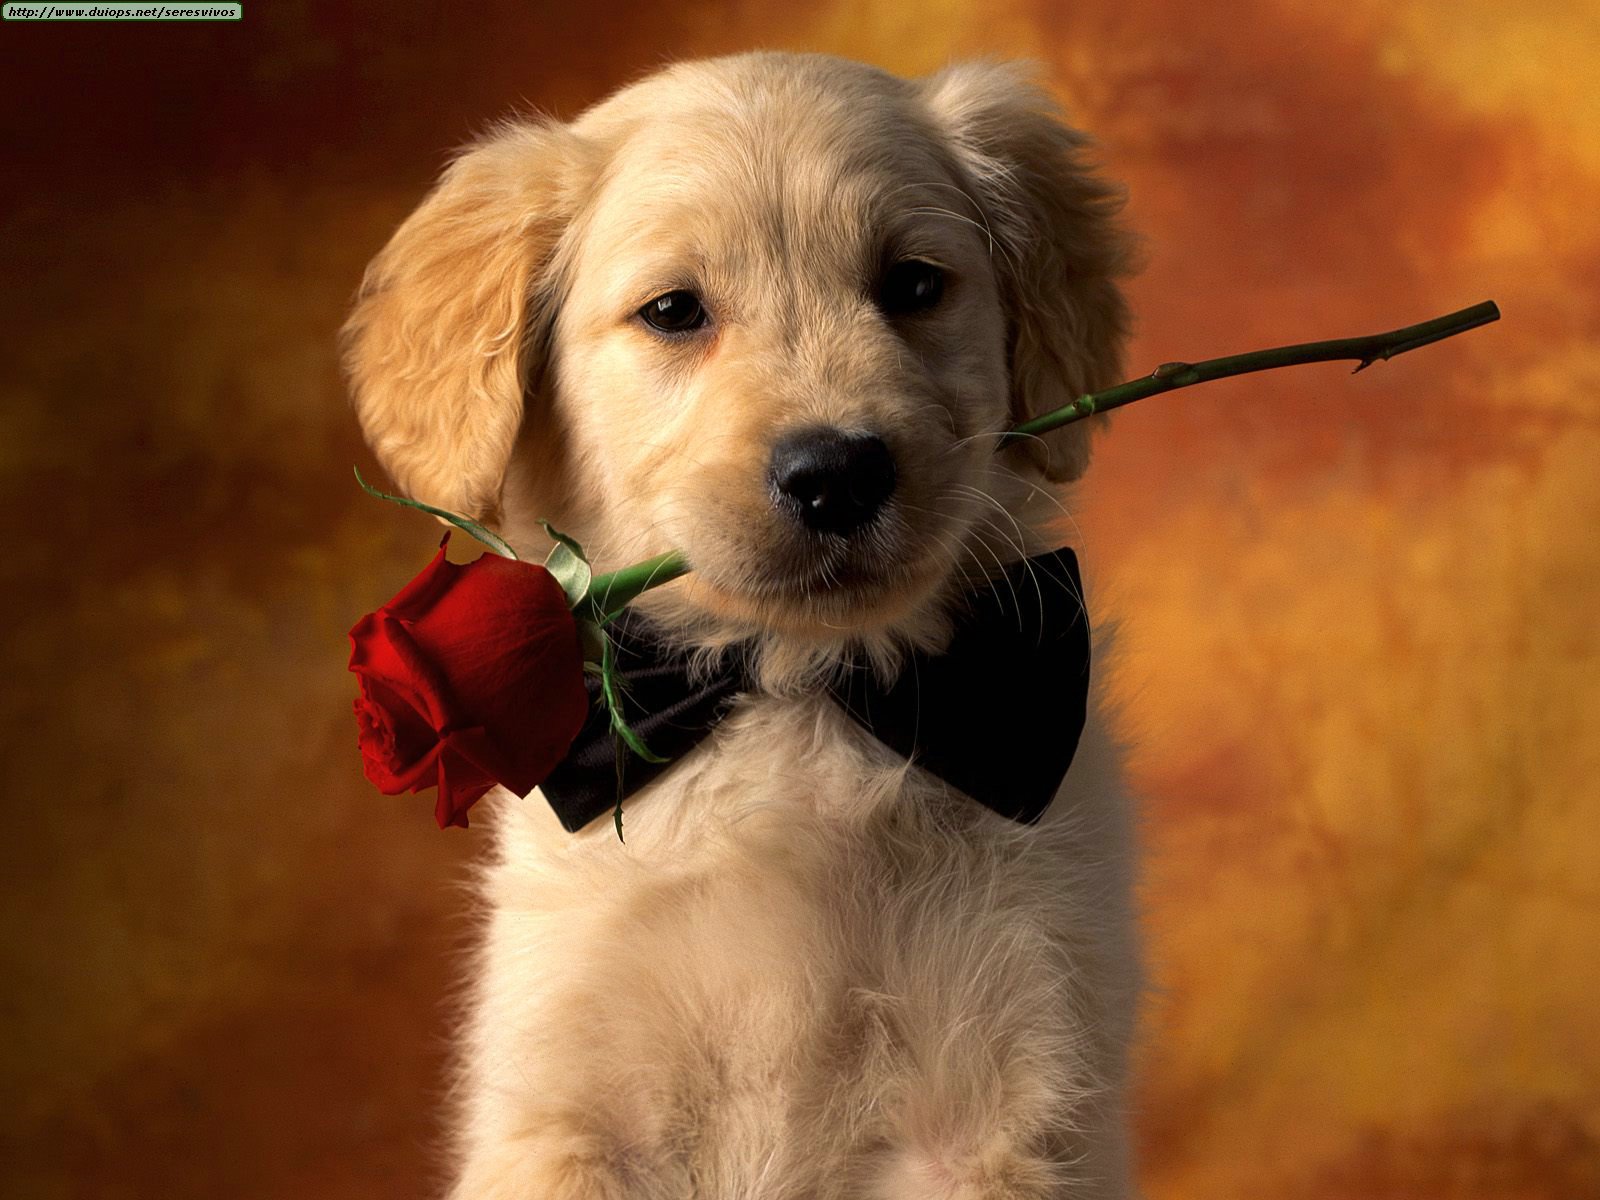 Funny Wallpapers Puppy love dogs puppy puppies dog games puppy love wallpaper puppy pictures